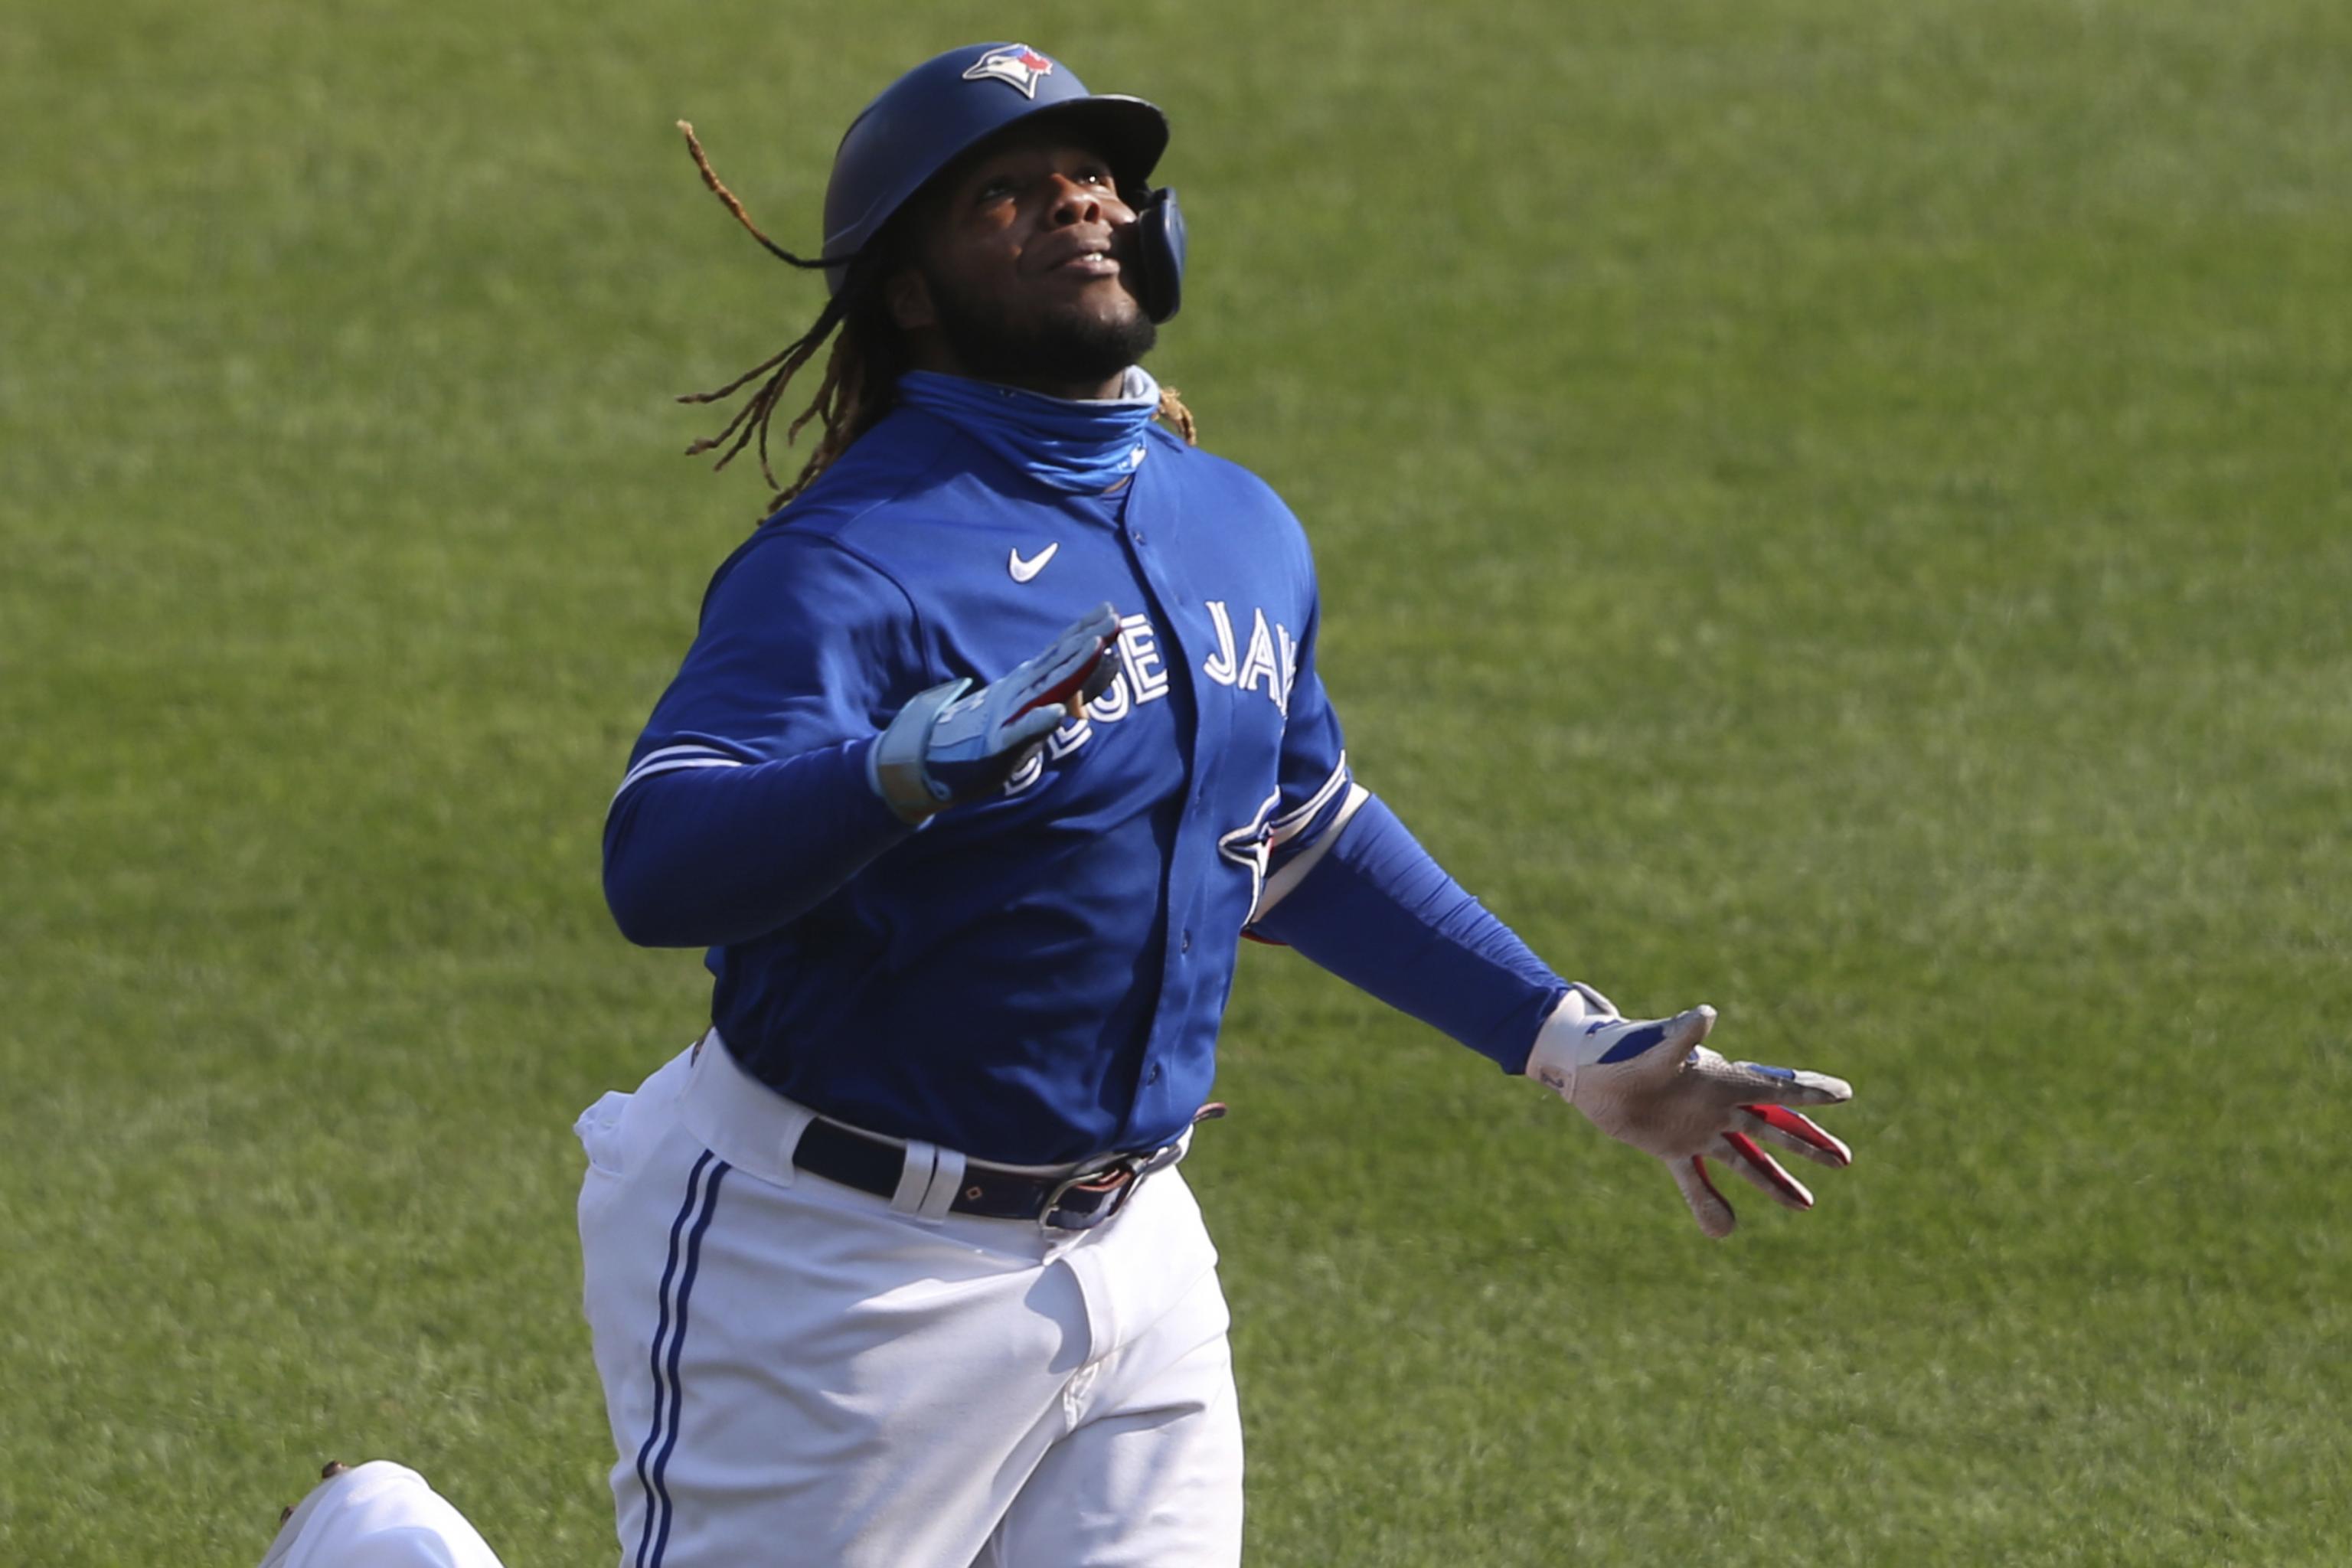 Jays infielder Vladimir Guerrero Jr. says he shed 42 pounds over the  off-season